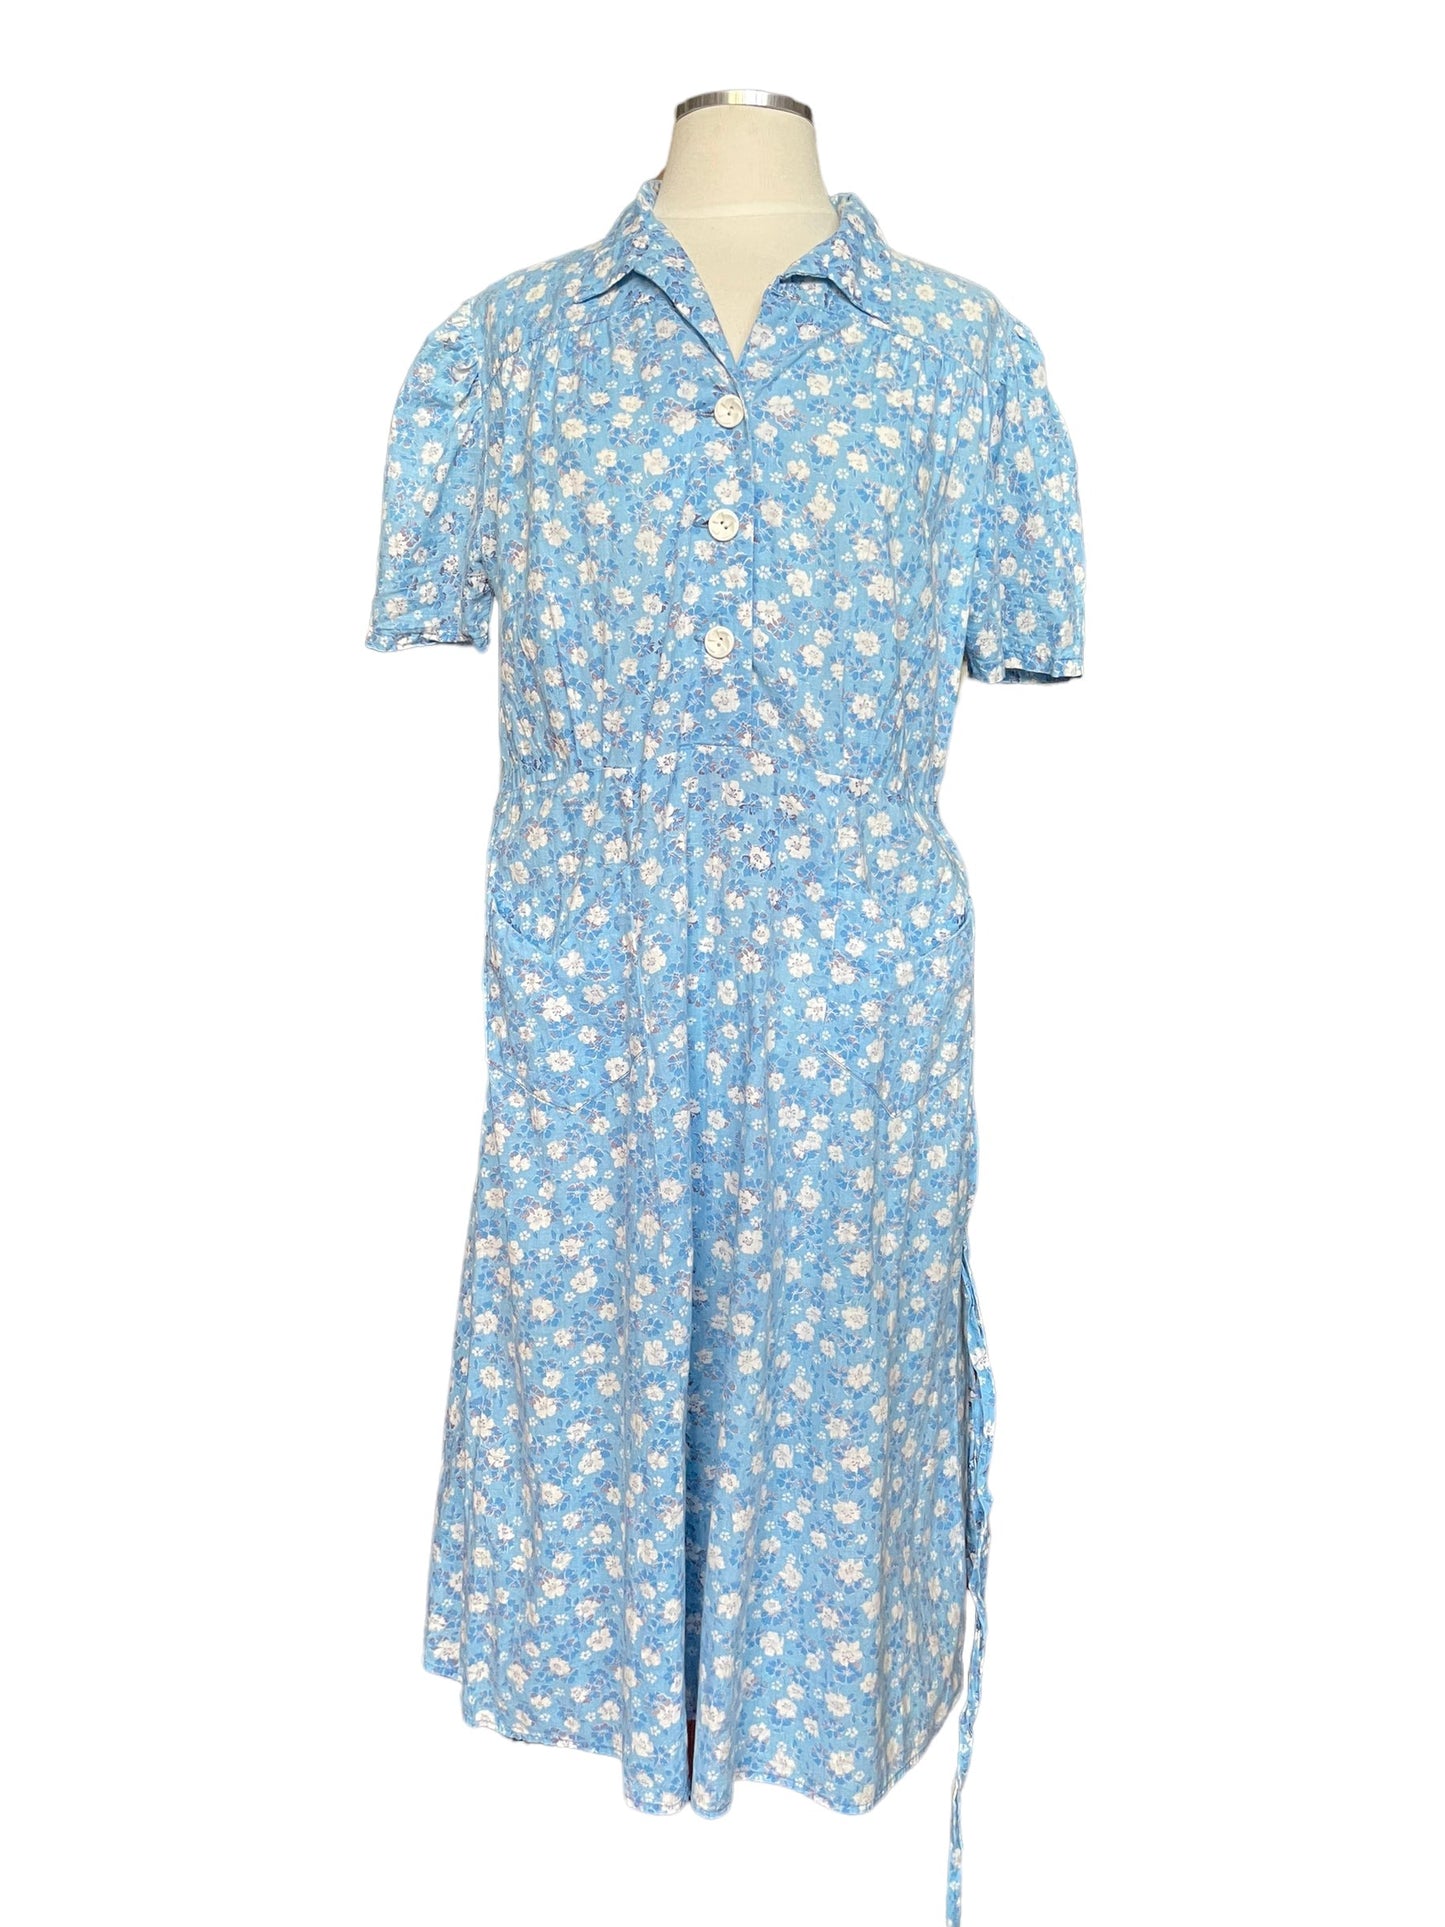 Full front view untied of Early 1950s Floral House Dress | Seattle True Vintage | Barn Owl Ladies Vintage